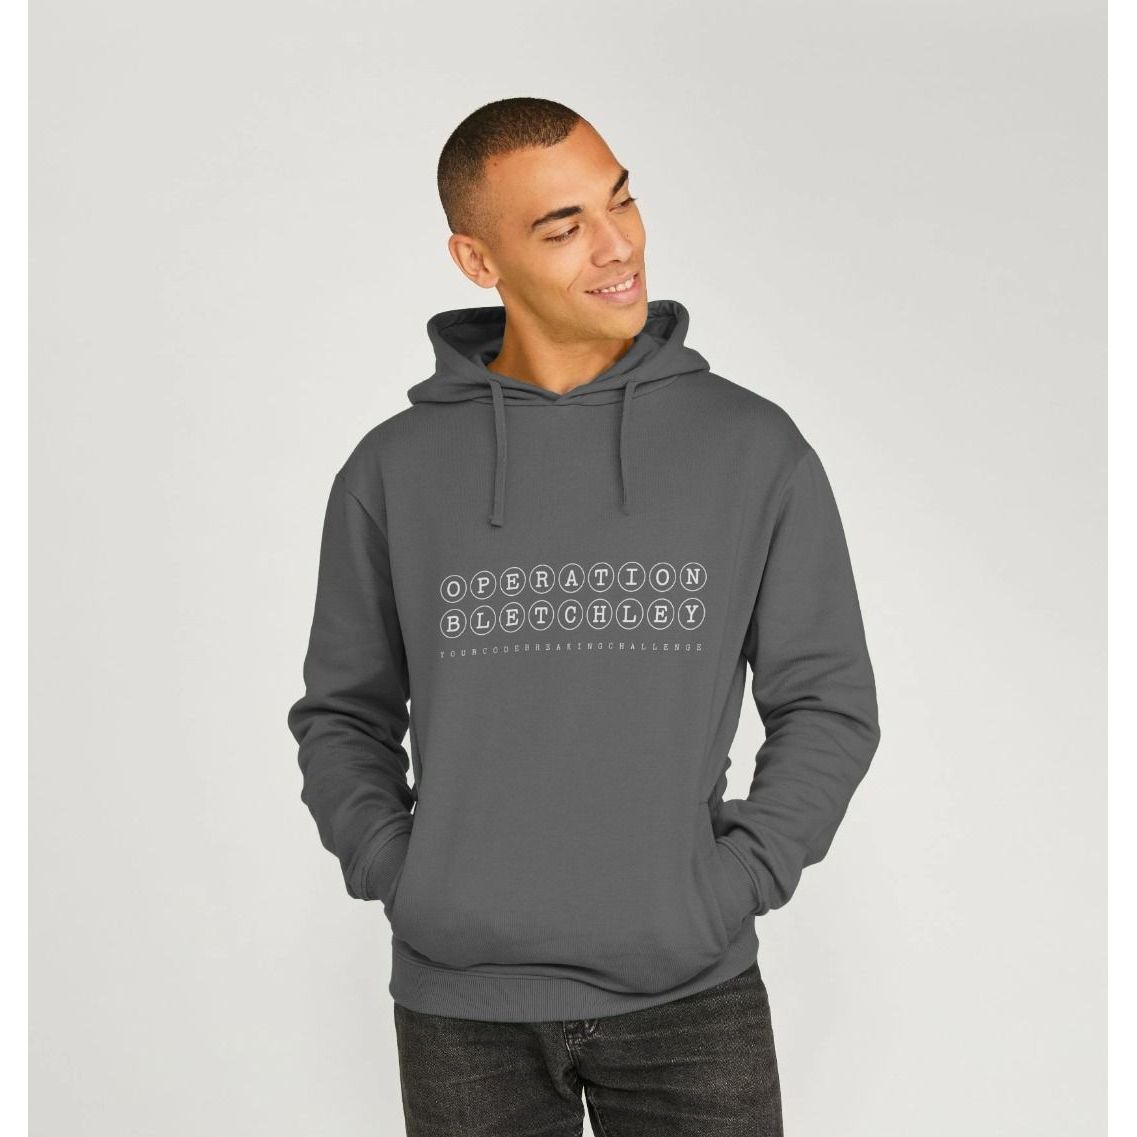 Operation Bletchley adults unisex hoodie - ABF The Soldiers' Charity Shop